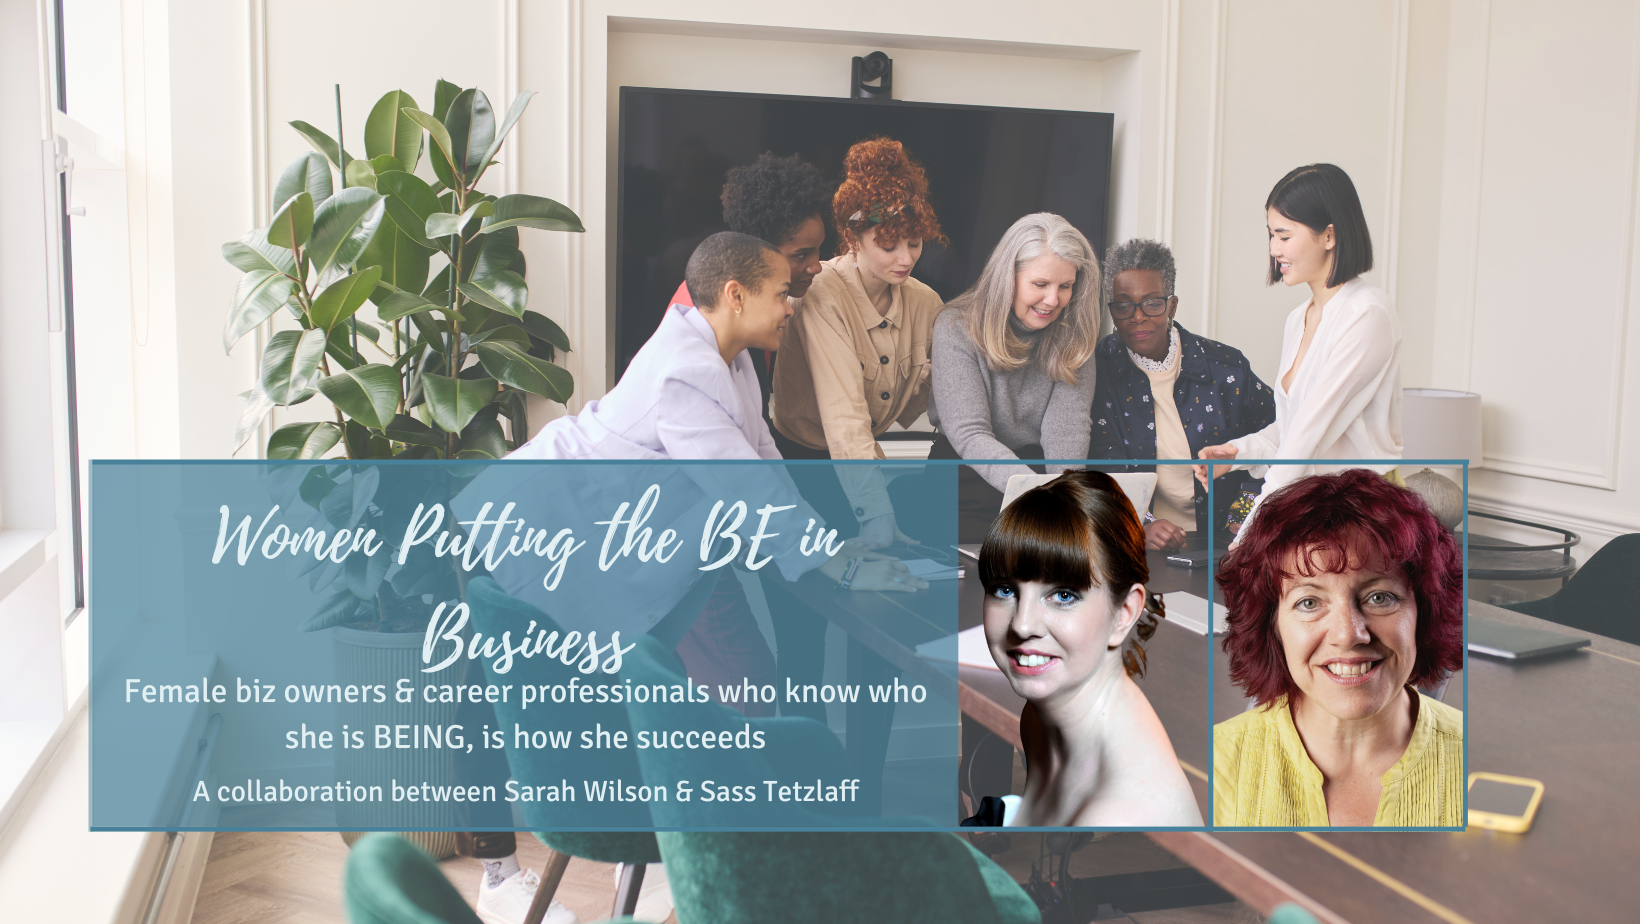 Facebook banner with a group of women socialising . The title is "Women Putting the BE in Business". 